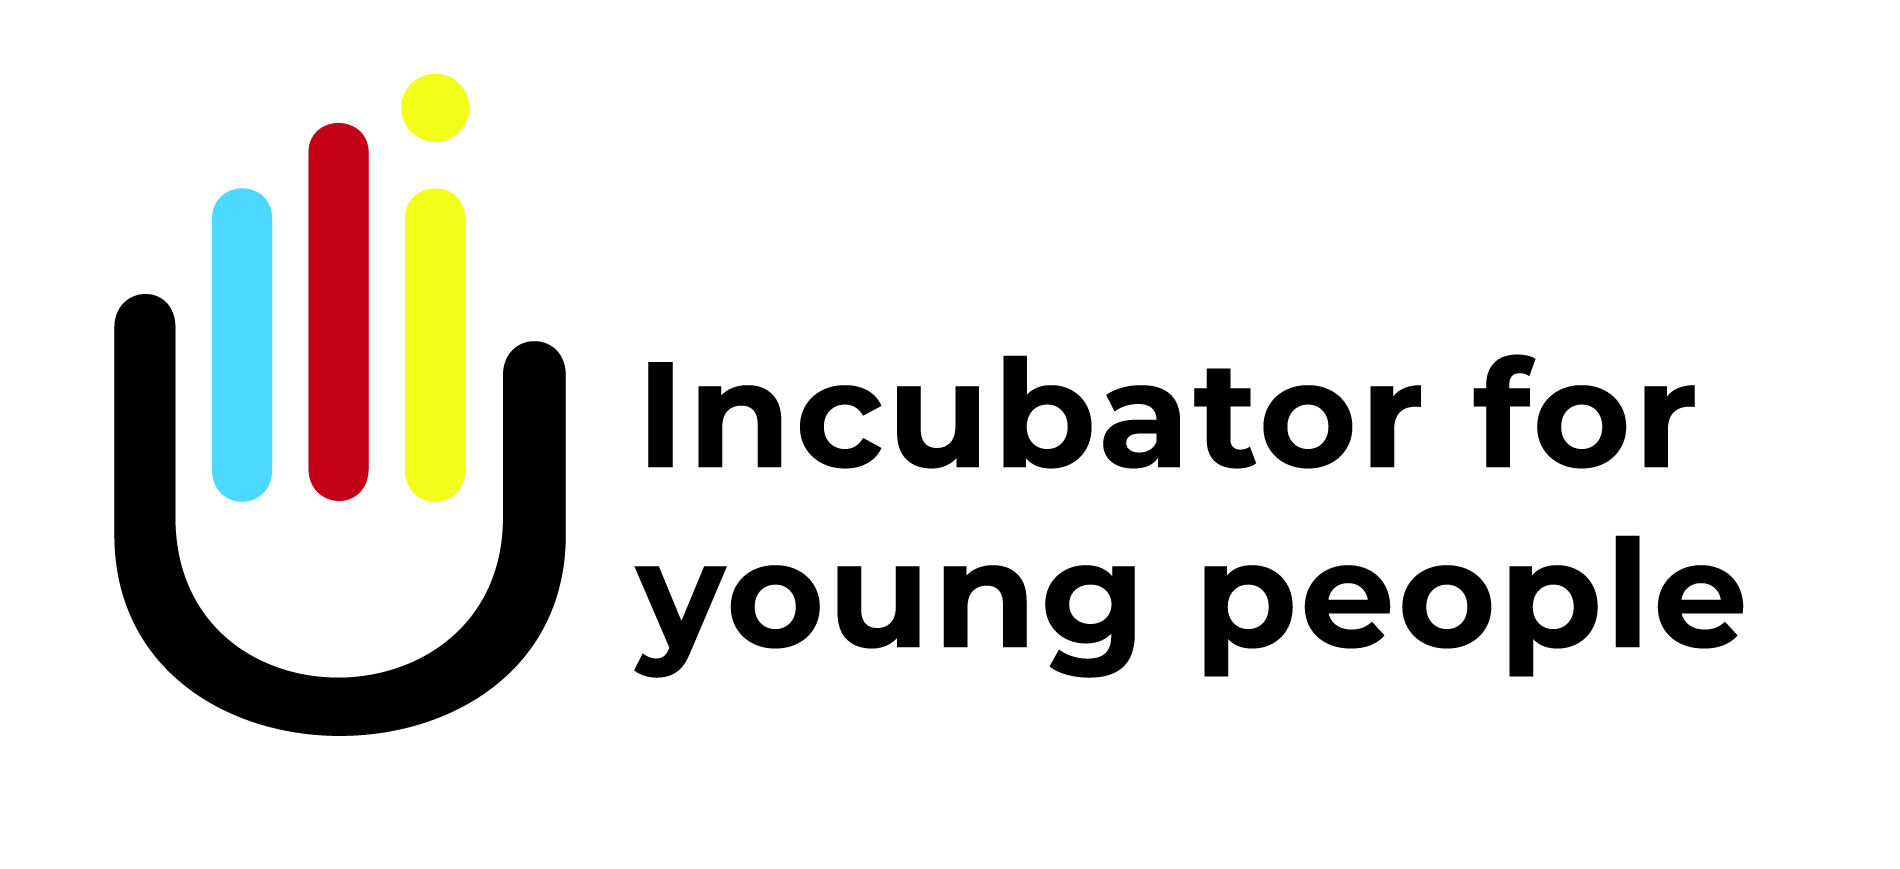 Incubator for young people